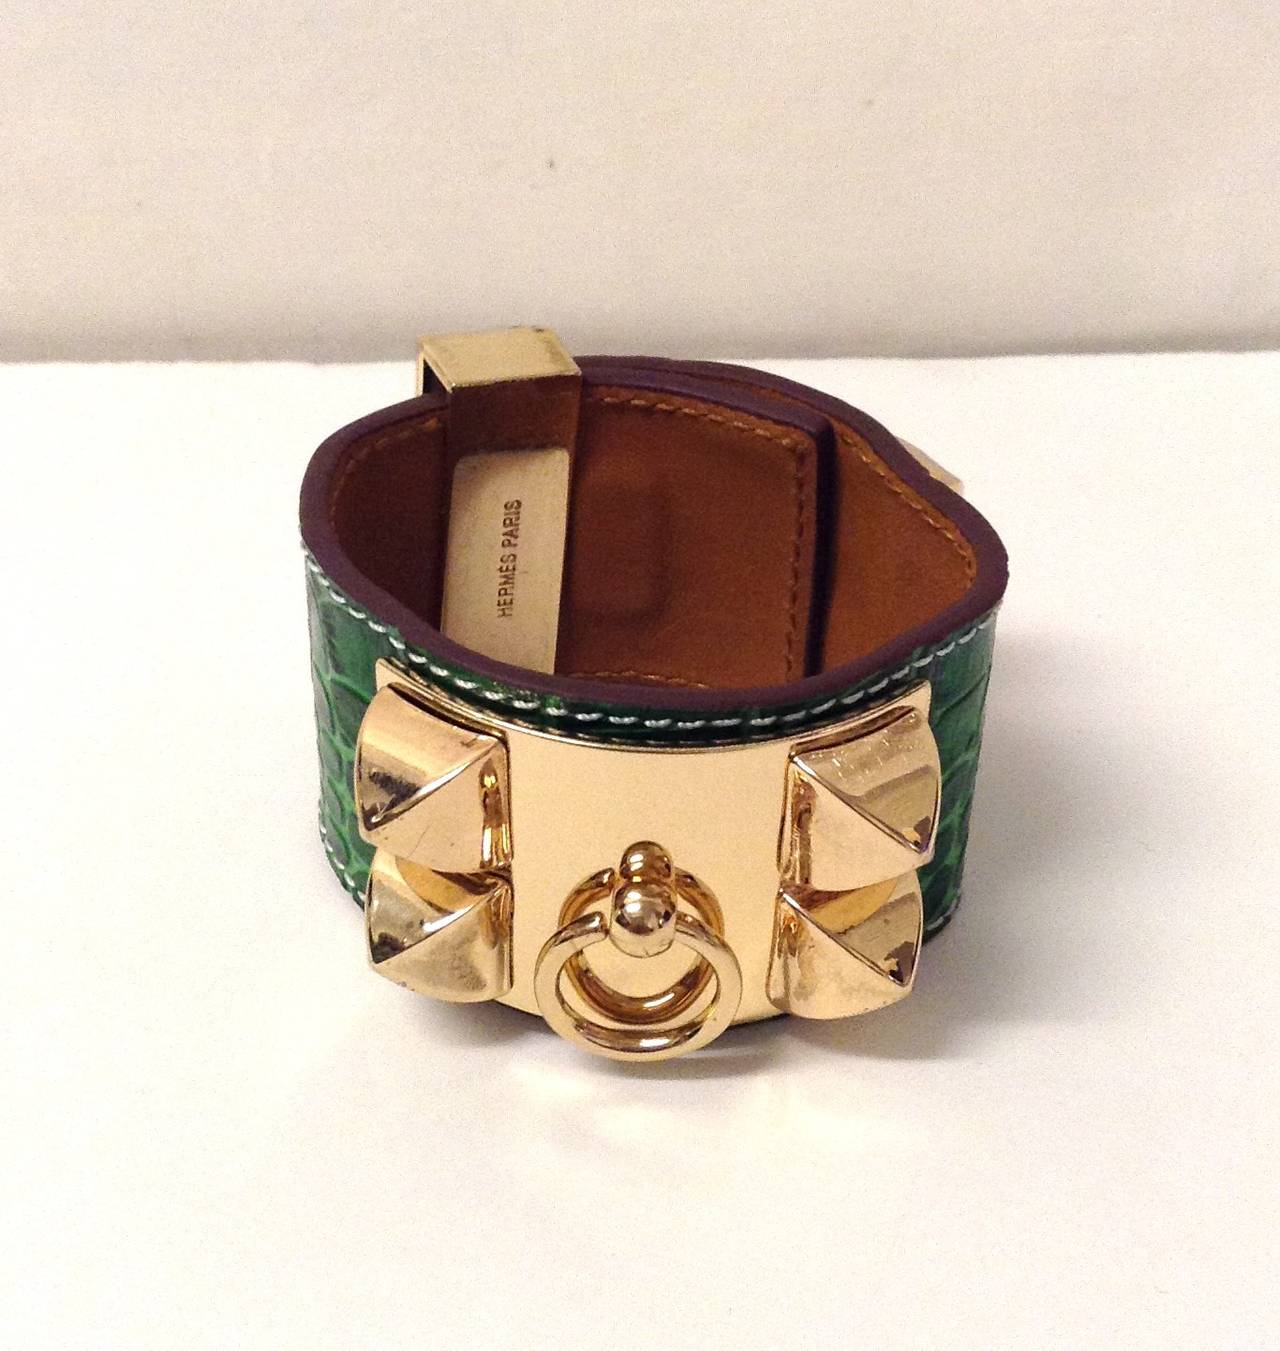 This is an authentic HERMES Shiny Alligator Collier De Chien CDC Bracelet in Small Emerald Green This stylish bracelet is crafted of Green alligator skin and features two palladium silver plates, one with decorative studs and a dangling ring, and